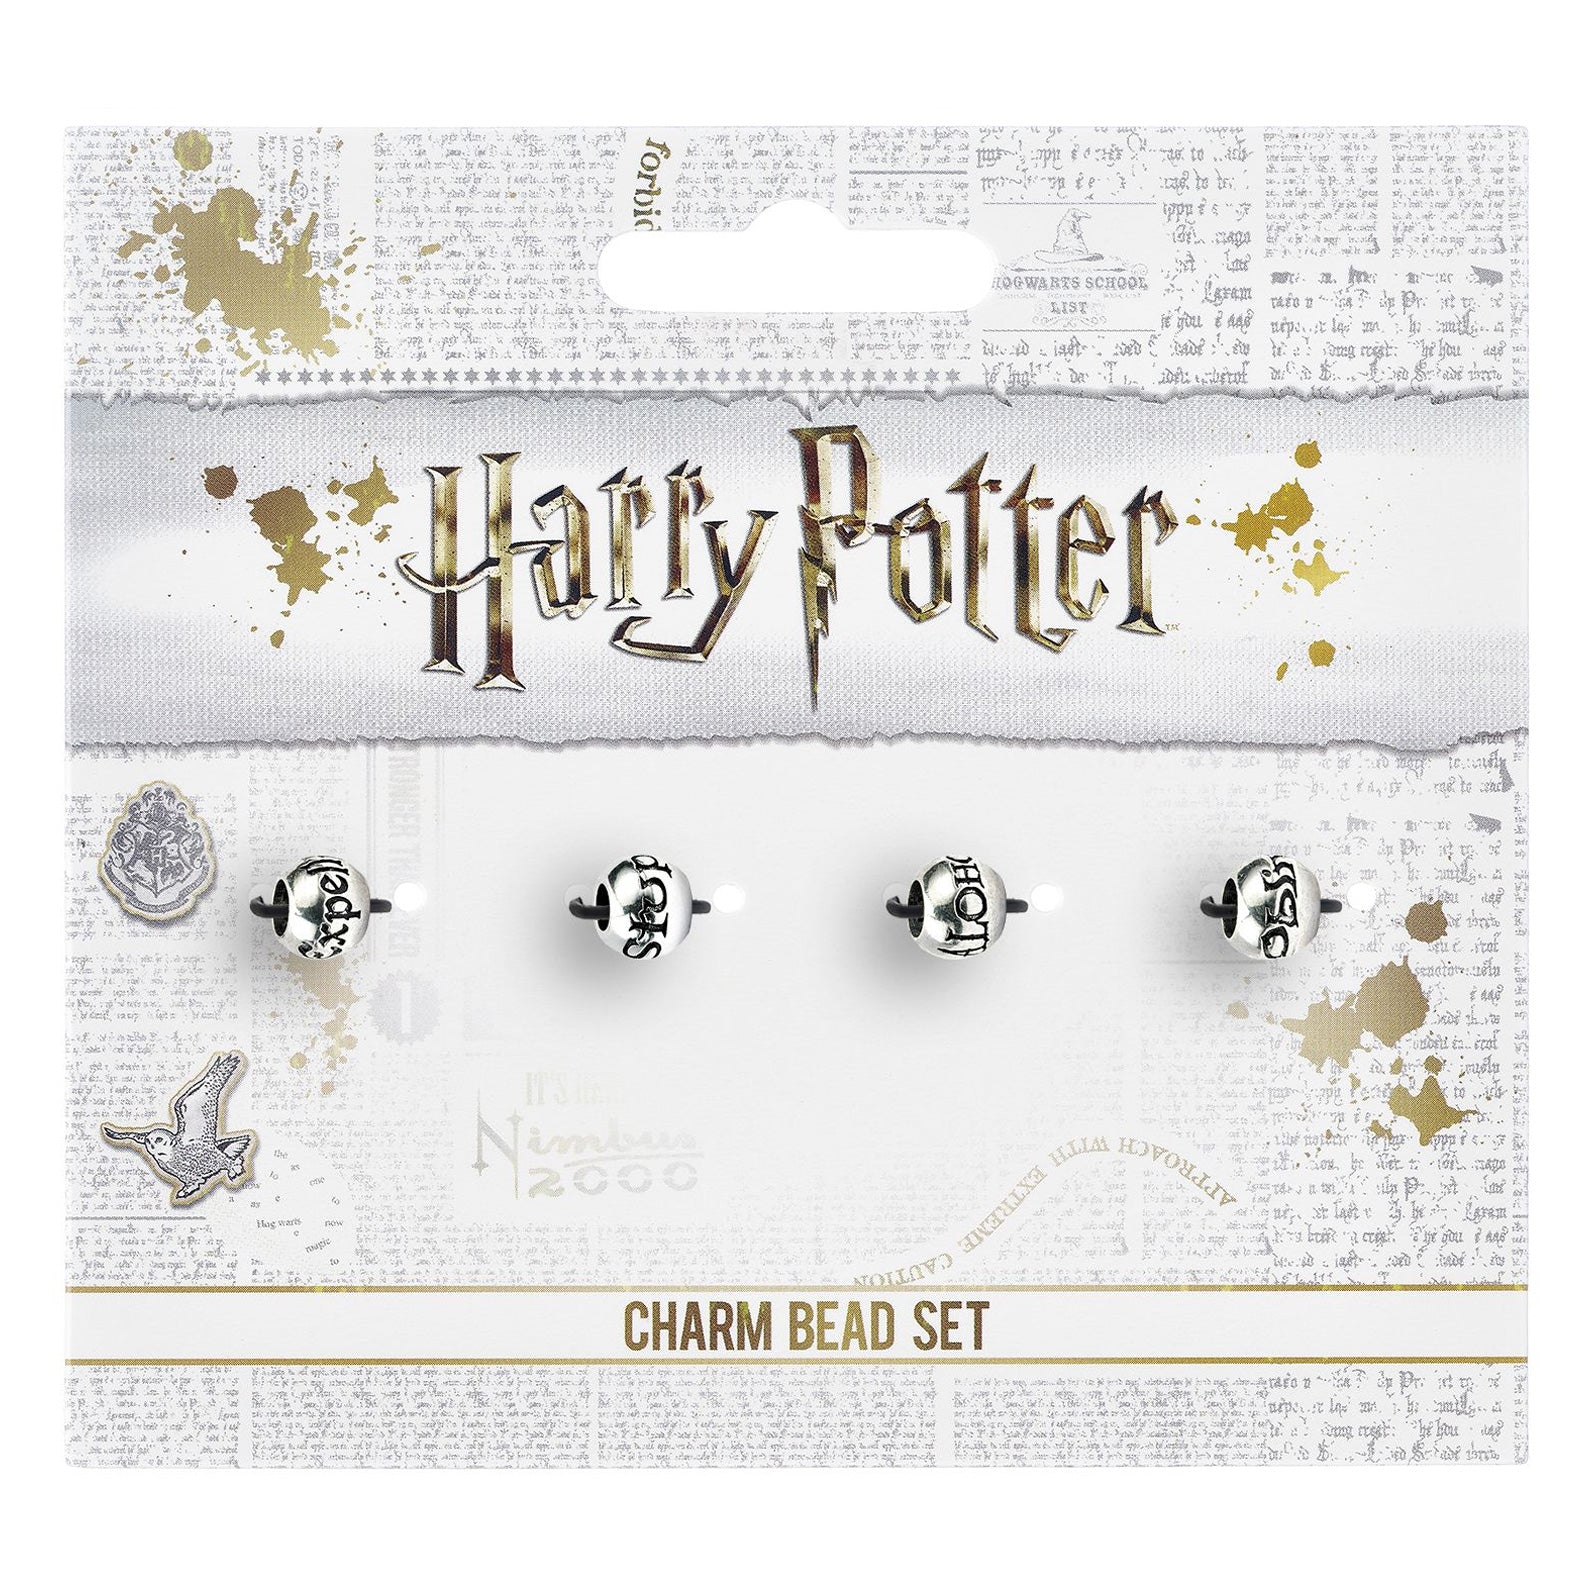 Harry Potter - Slider Charms – Curiosa - Purveyors of Extraordinary Things